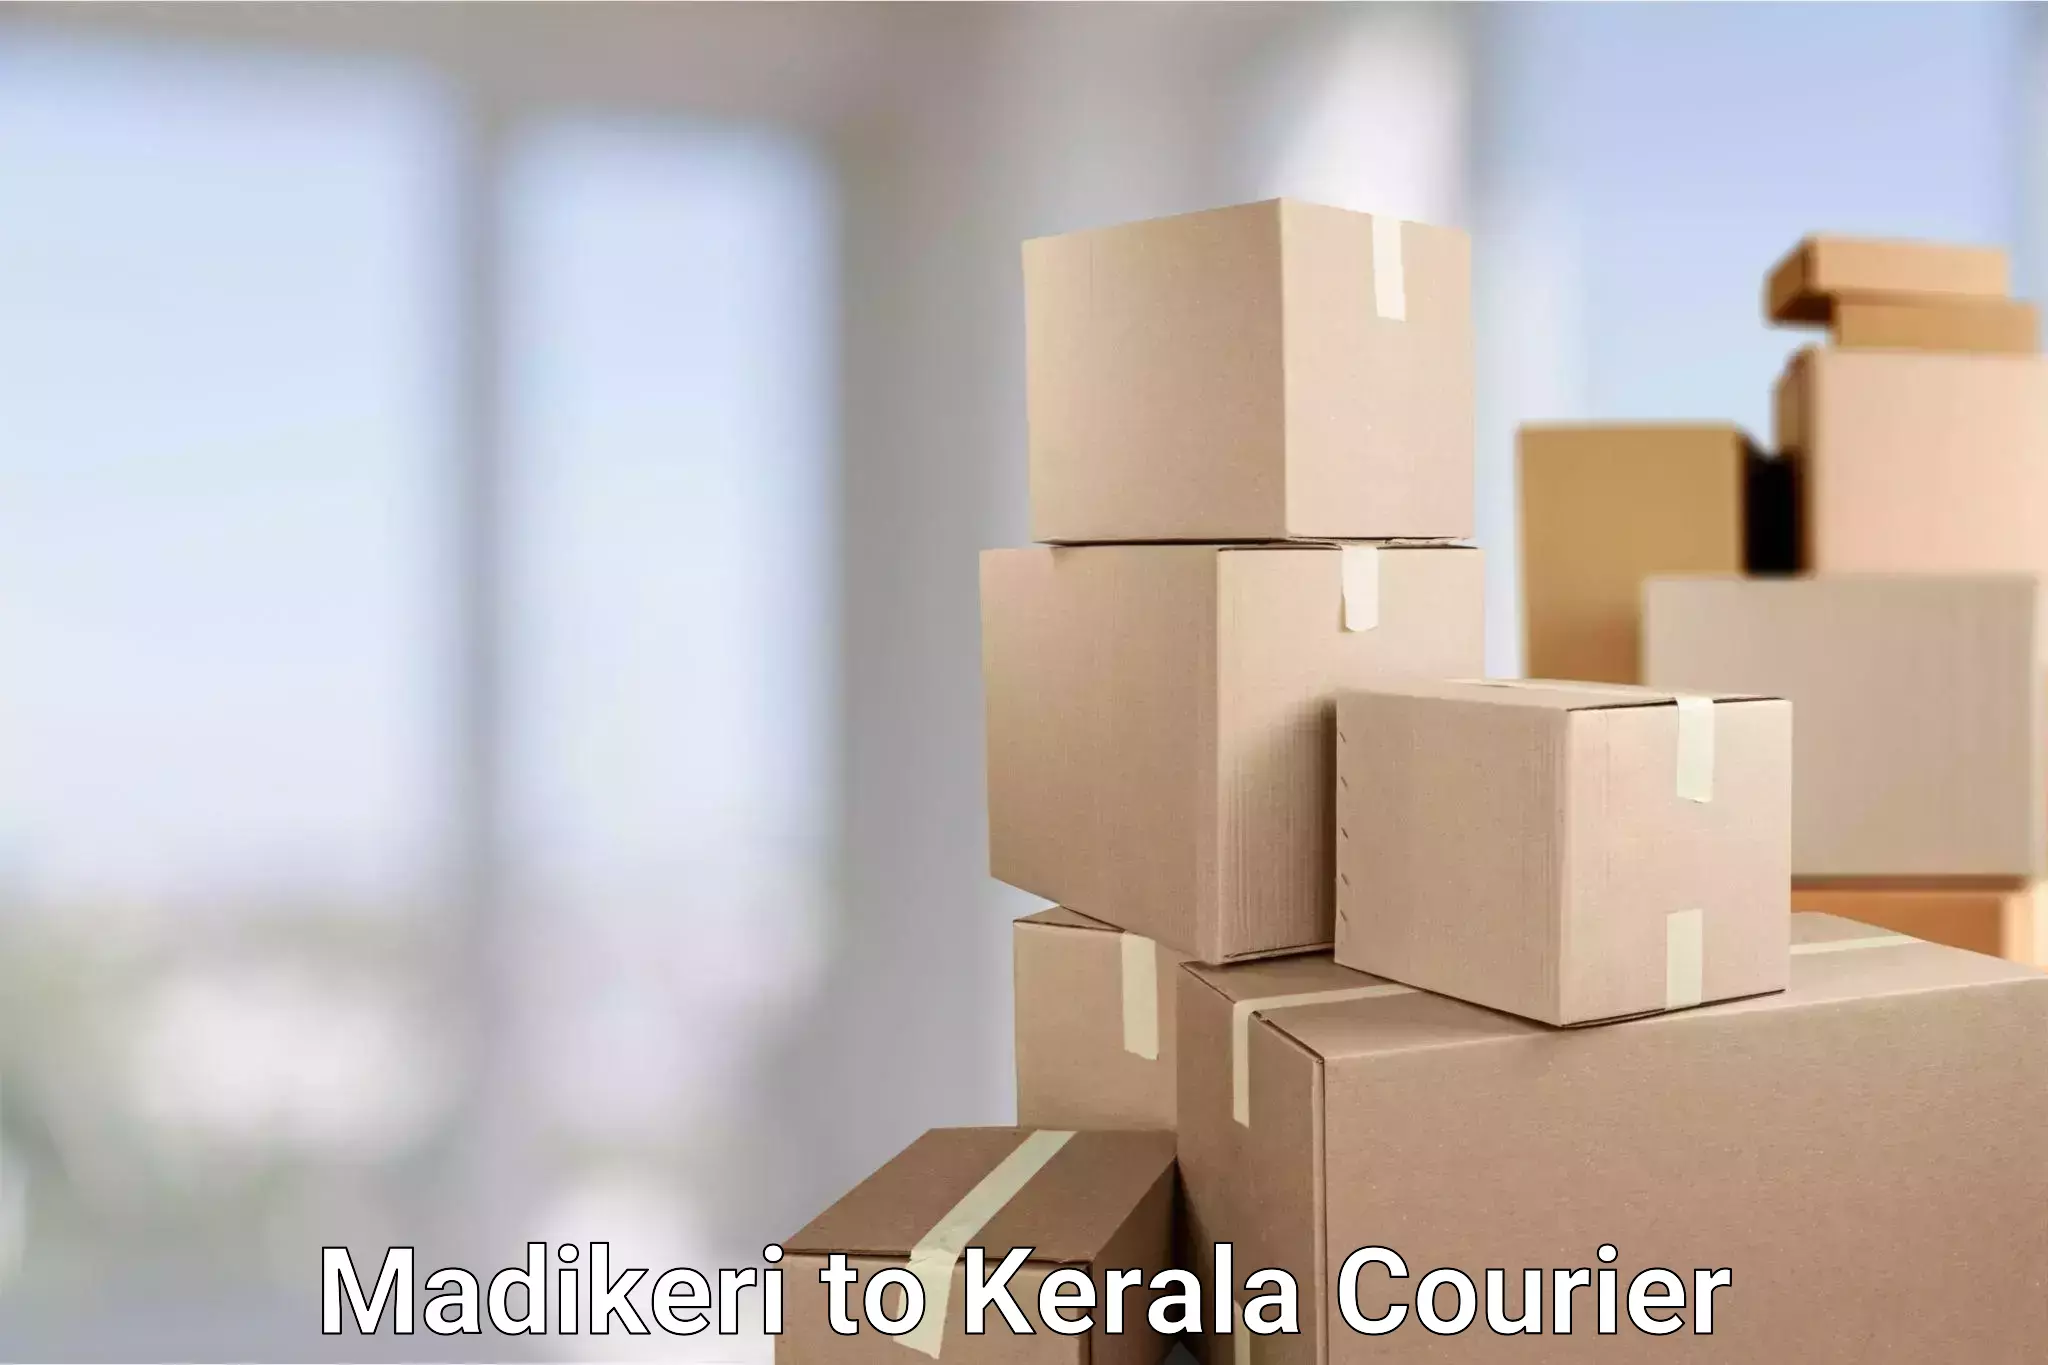 Parcel delivery automation Madikeri to Nedumangad